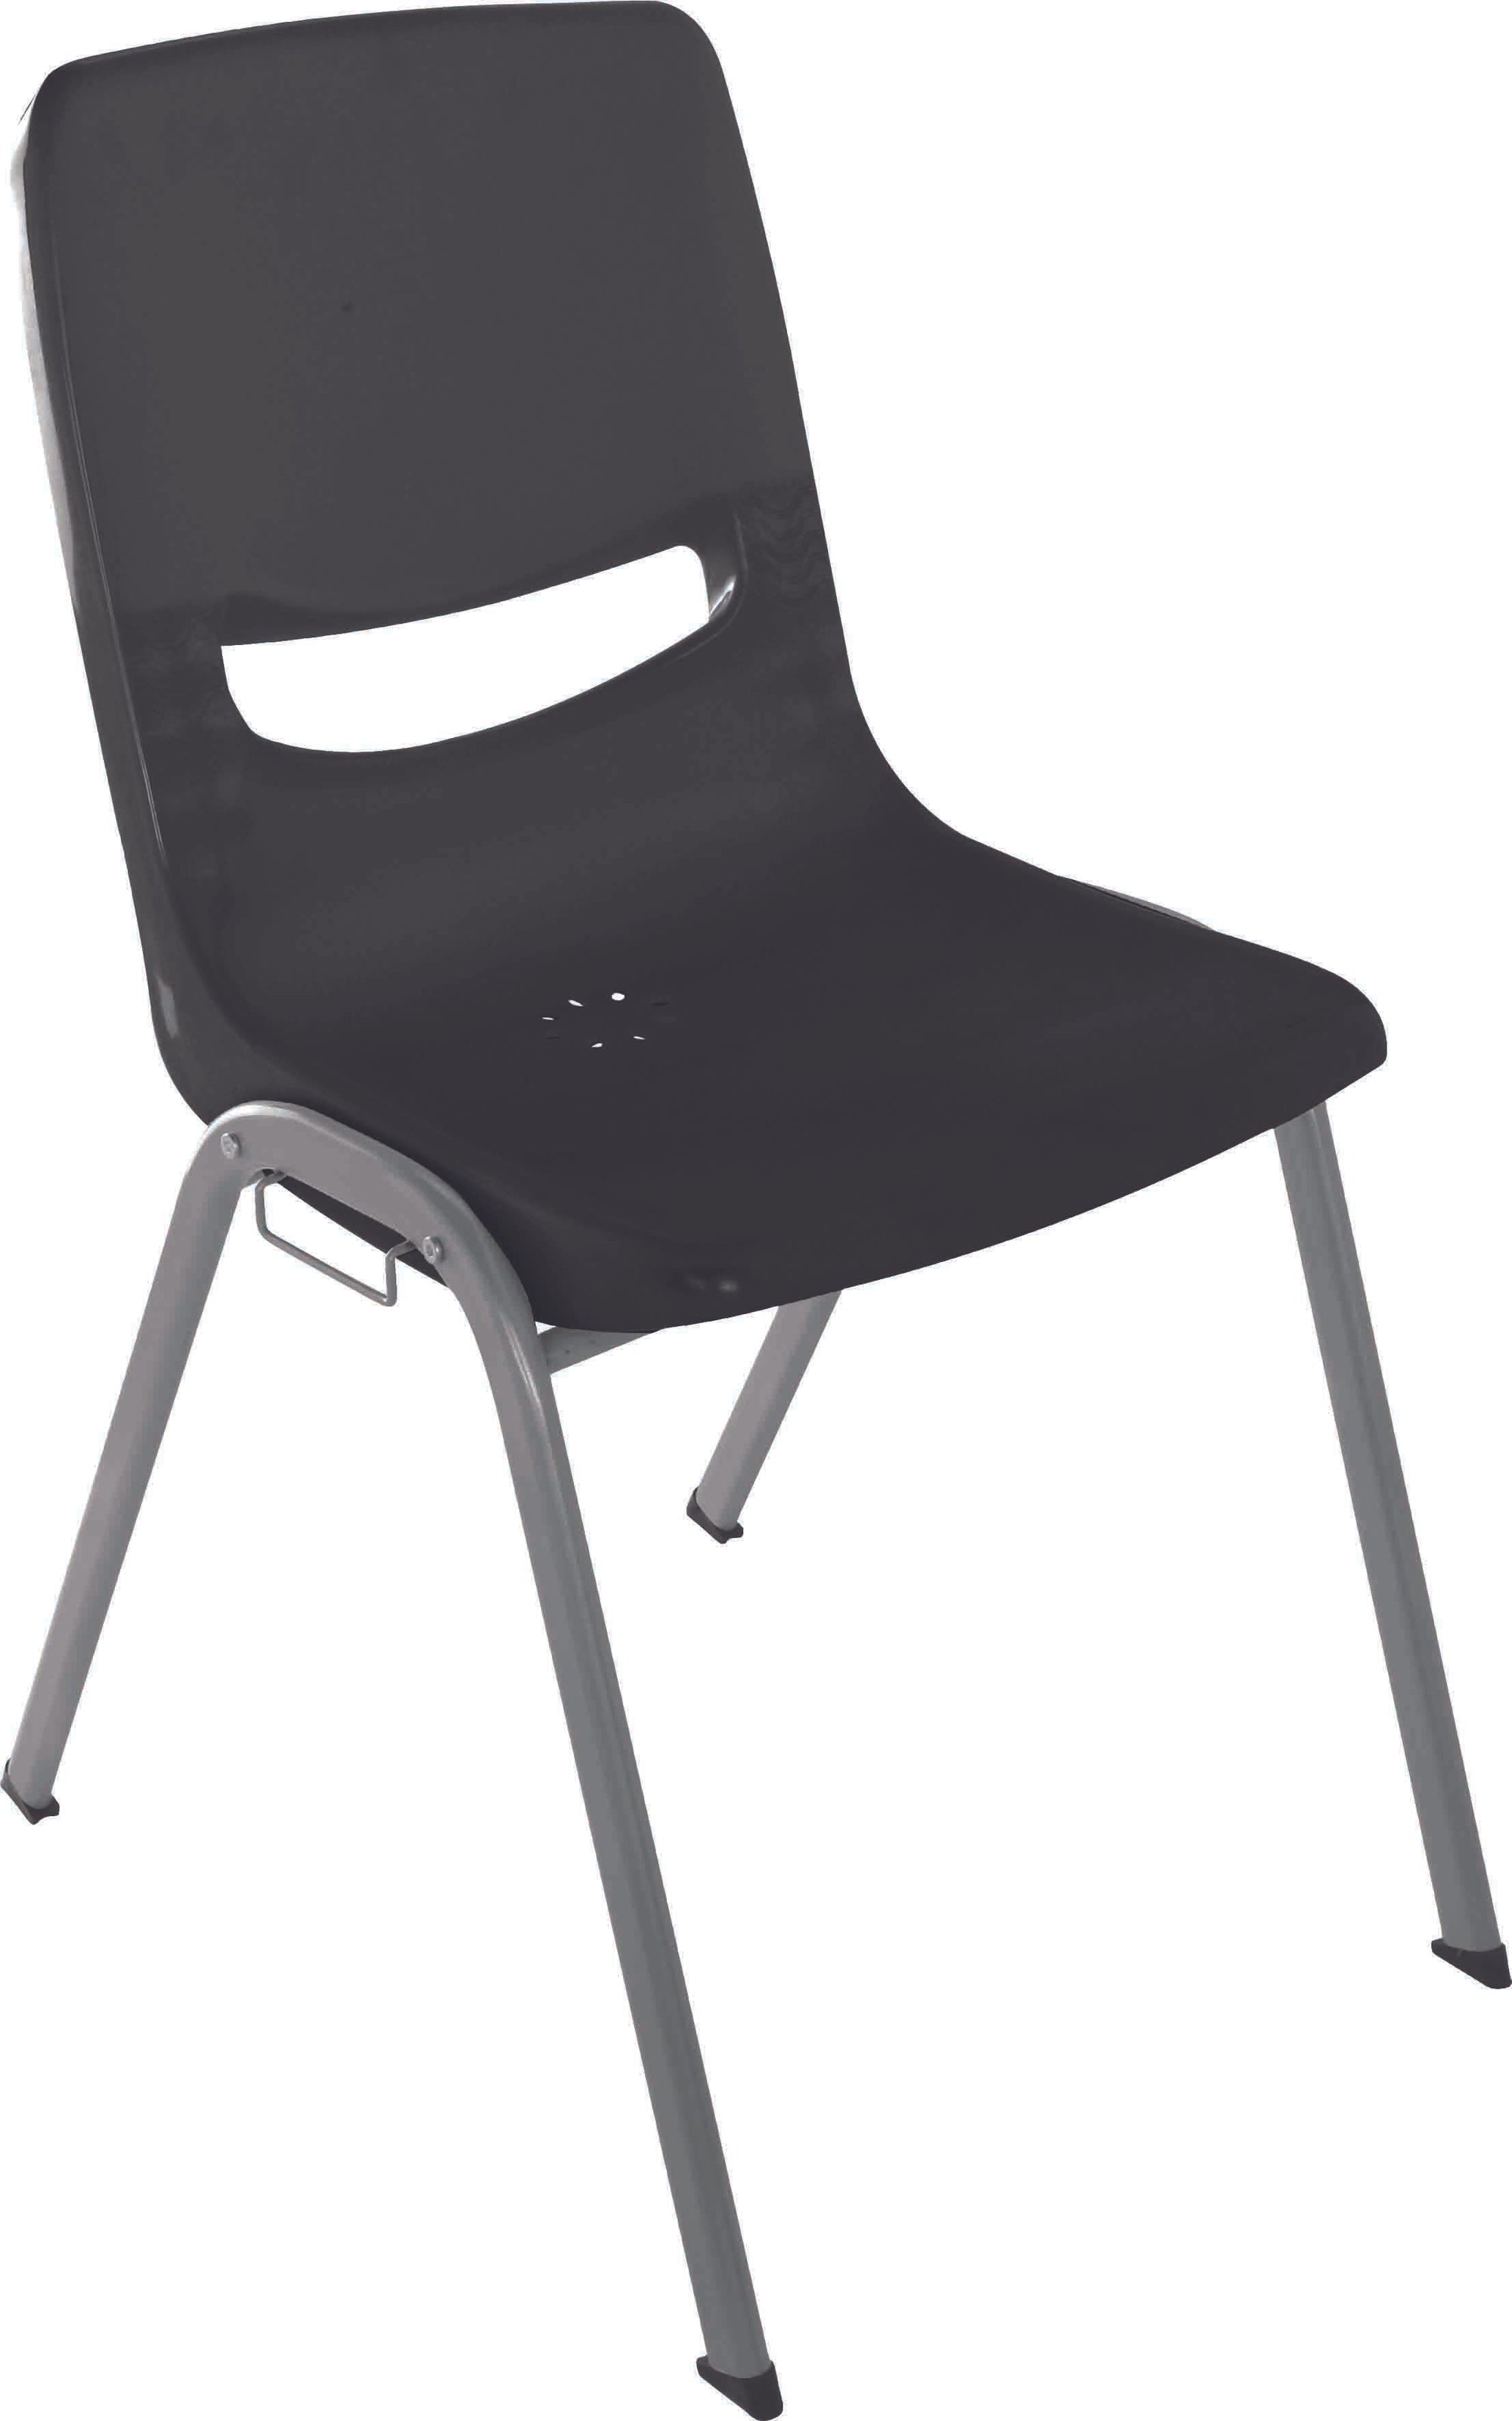 Tootz Linking Chair